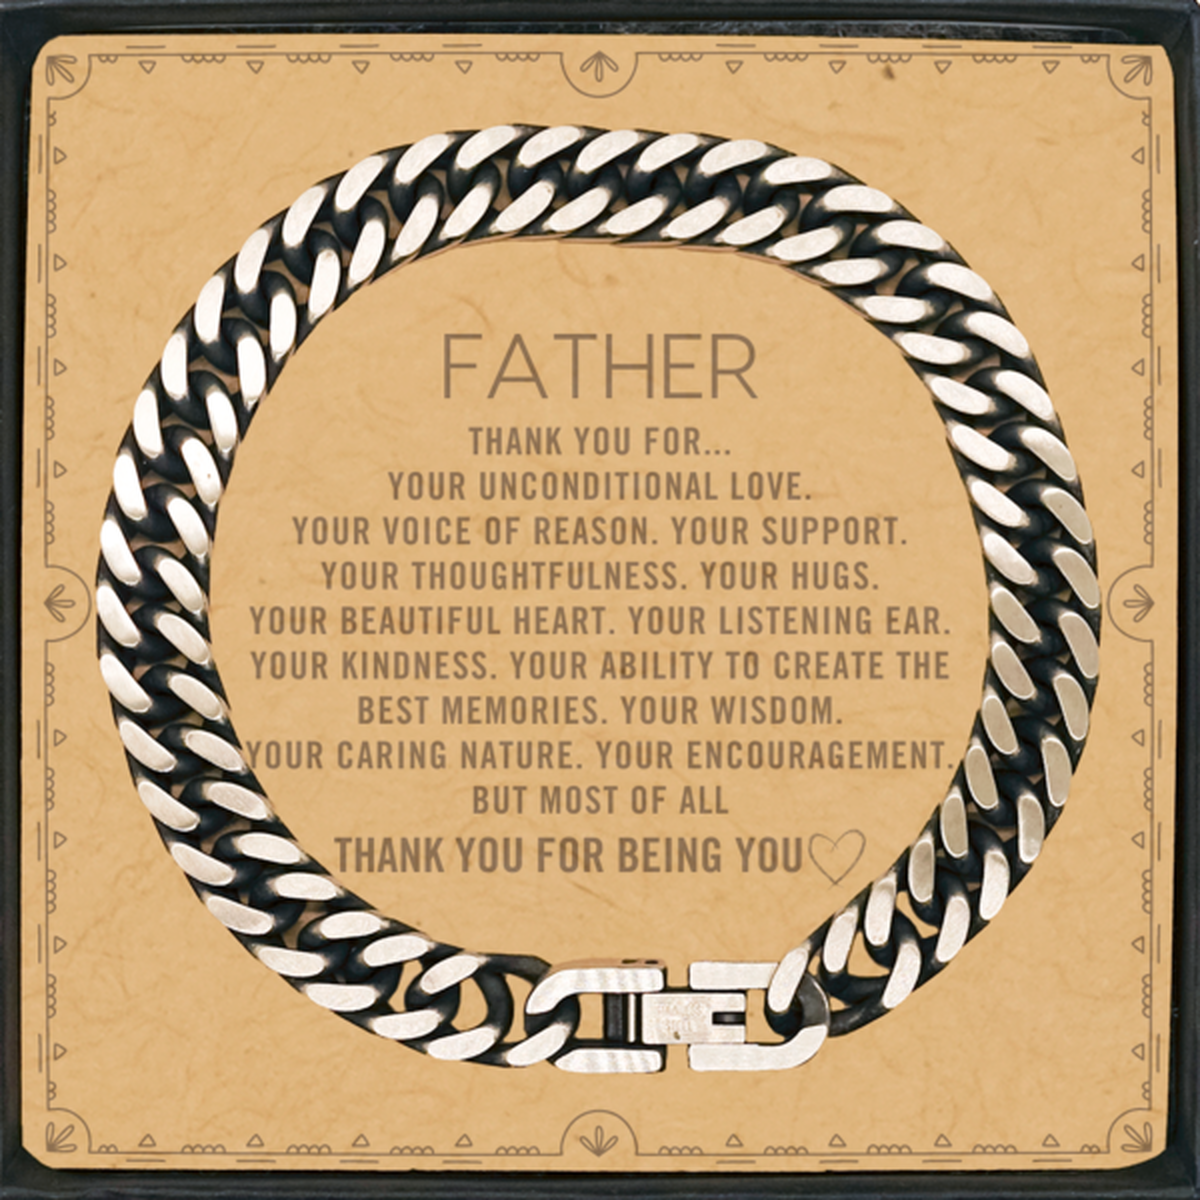 Father Cuban Link Chain Bracelet Custom, Message Card Gifts For Father Christmas Graduation Birthday Gifts for Men Women Father Thank you for Your unconditional love